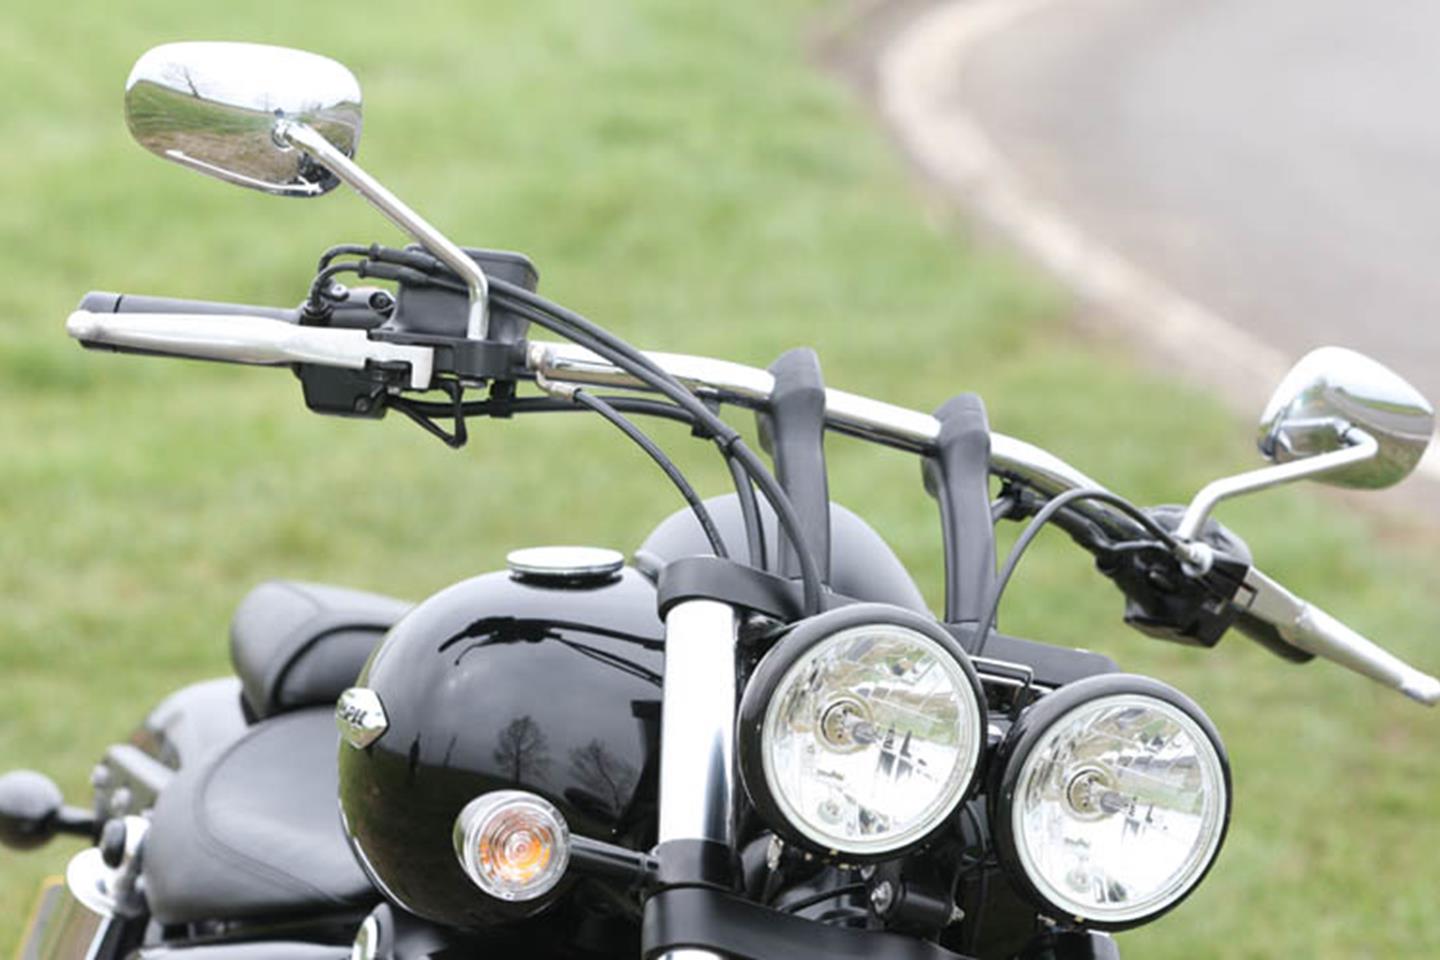 Triumph Thunderbird accessories are a little thin on the ground but there's plenty on offer on the aftermarket